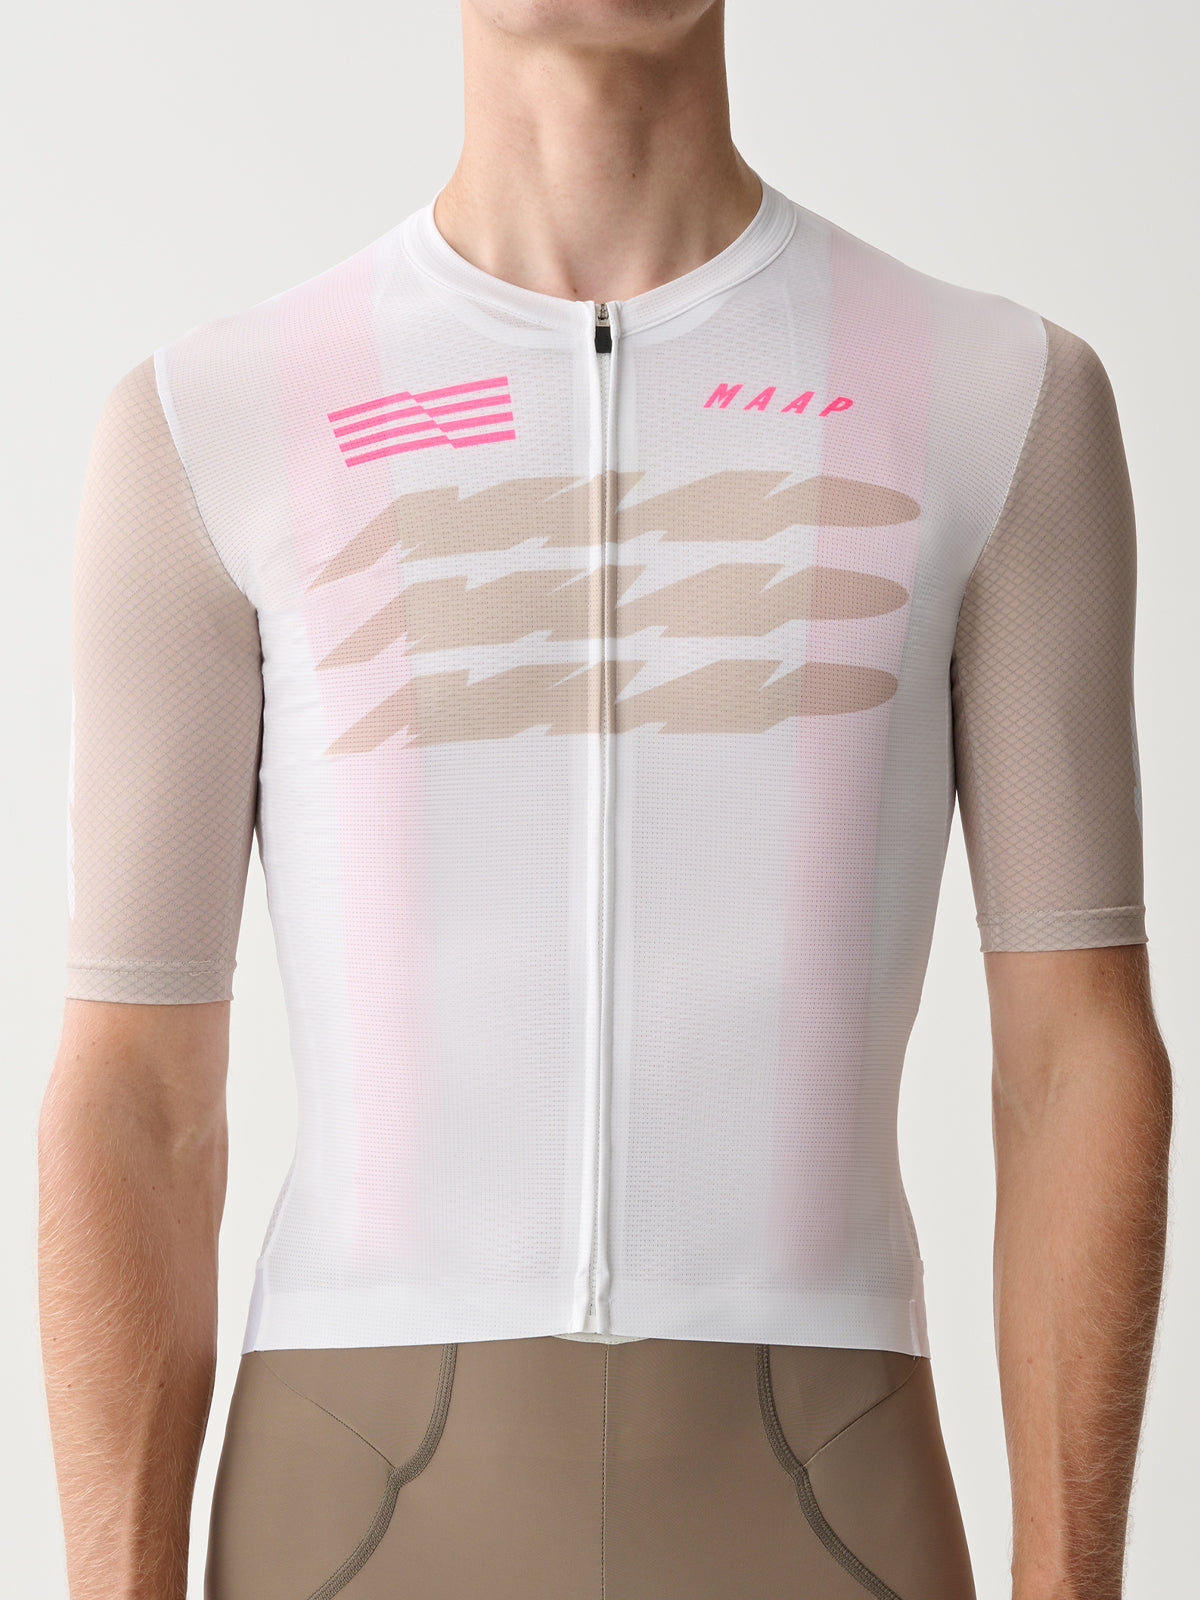 Eclipse Pro Air Jersey 2.0 - White - MAAP